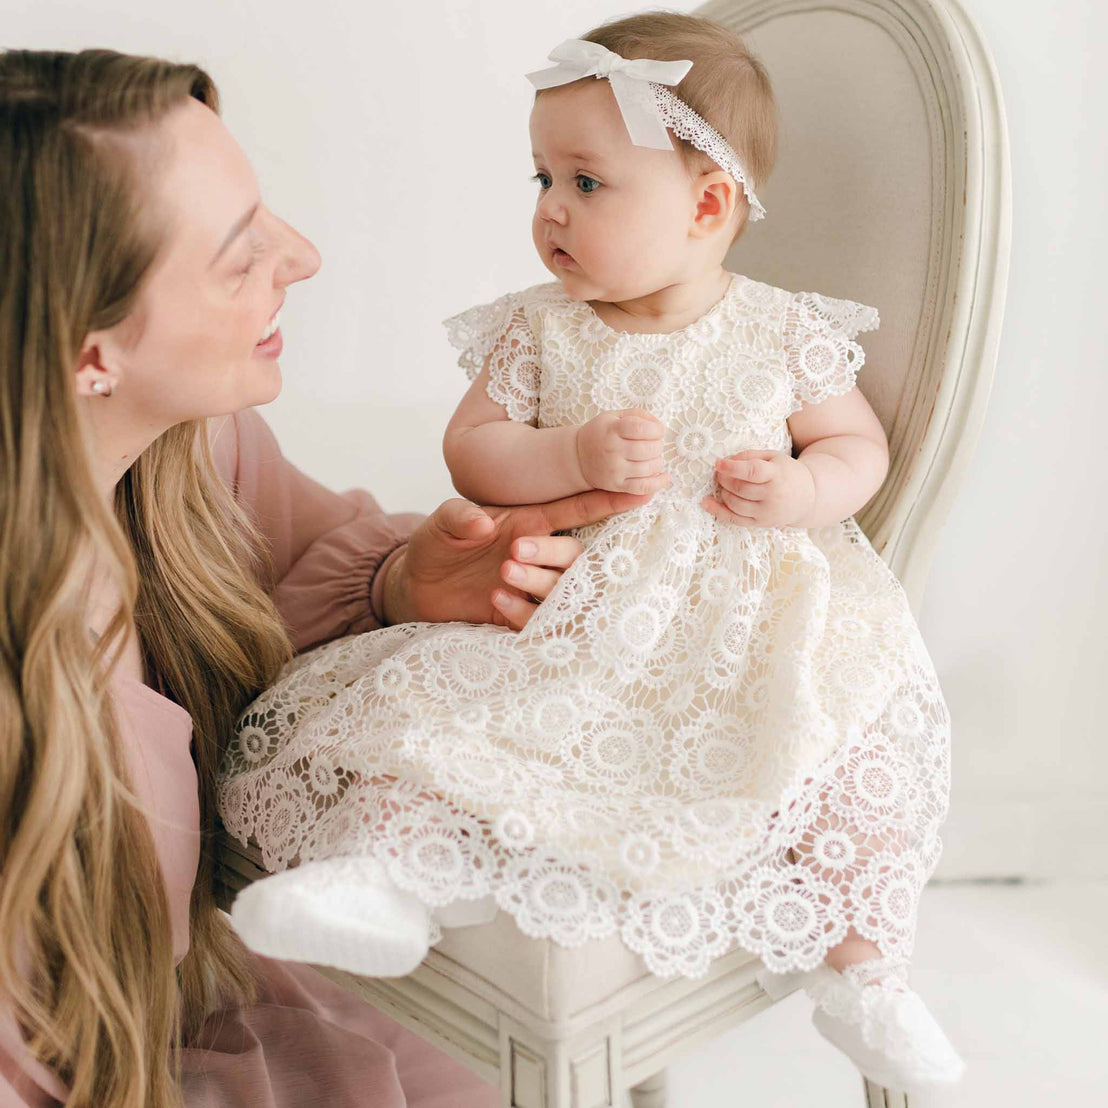 A woman with long, light brown hair is looking at a baby sitting on a white chair. The baby, dressed in a delicate Poppy Blessing Dress & Bonnet with intricate lace, headband, and white socks, is looking forward. The plain white backdrop enhances the soft and light ambiance of this special moment.